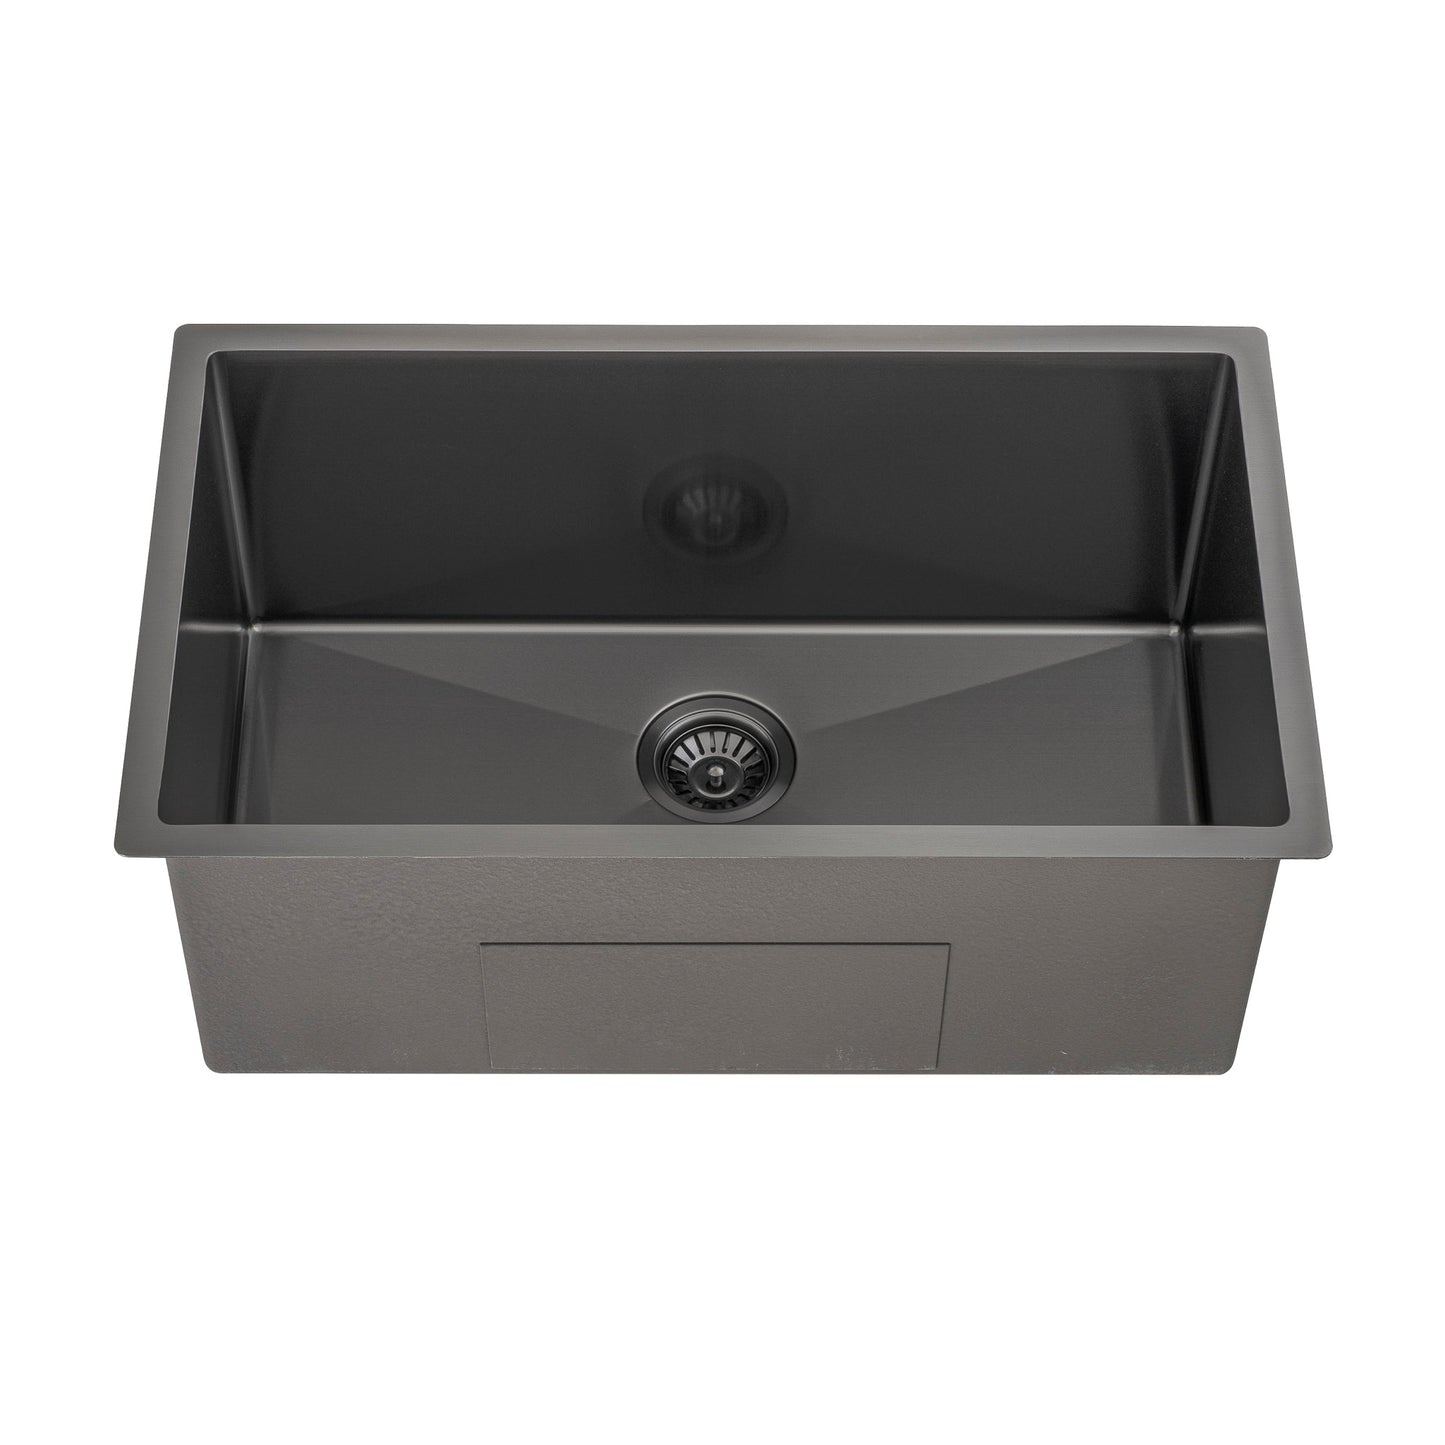 Retto II 750mm x 450mm x 300mm Extra Height Stainless Steel Sink, Brushed Gunmetal Black